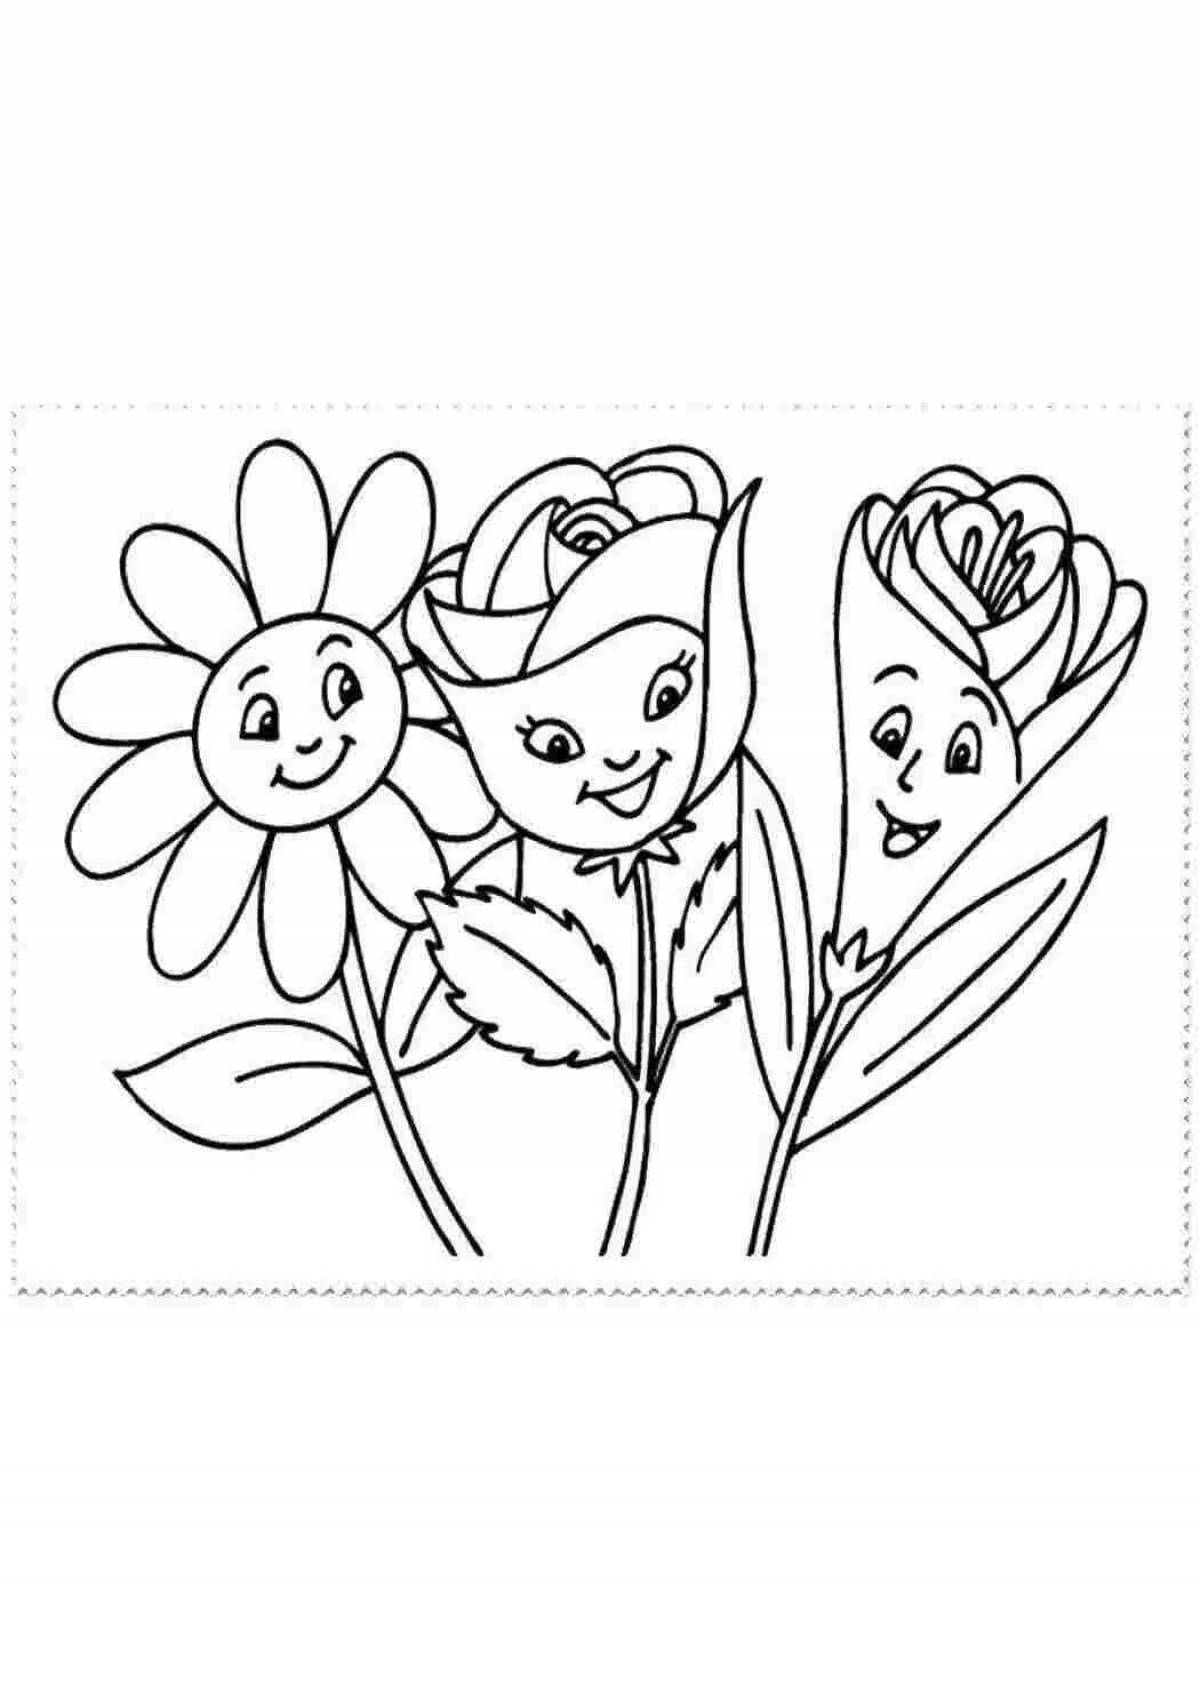 Coloring page of the flower of the balanced lasorica